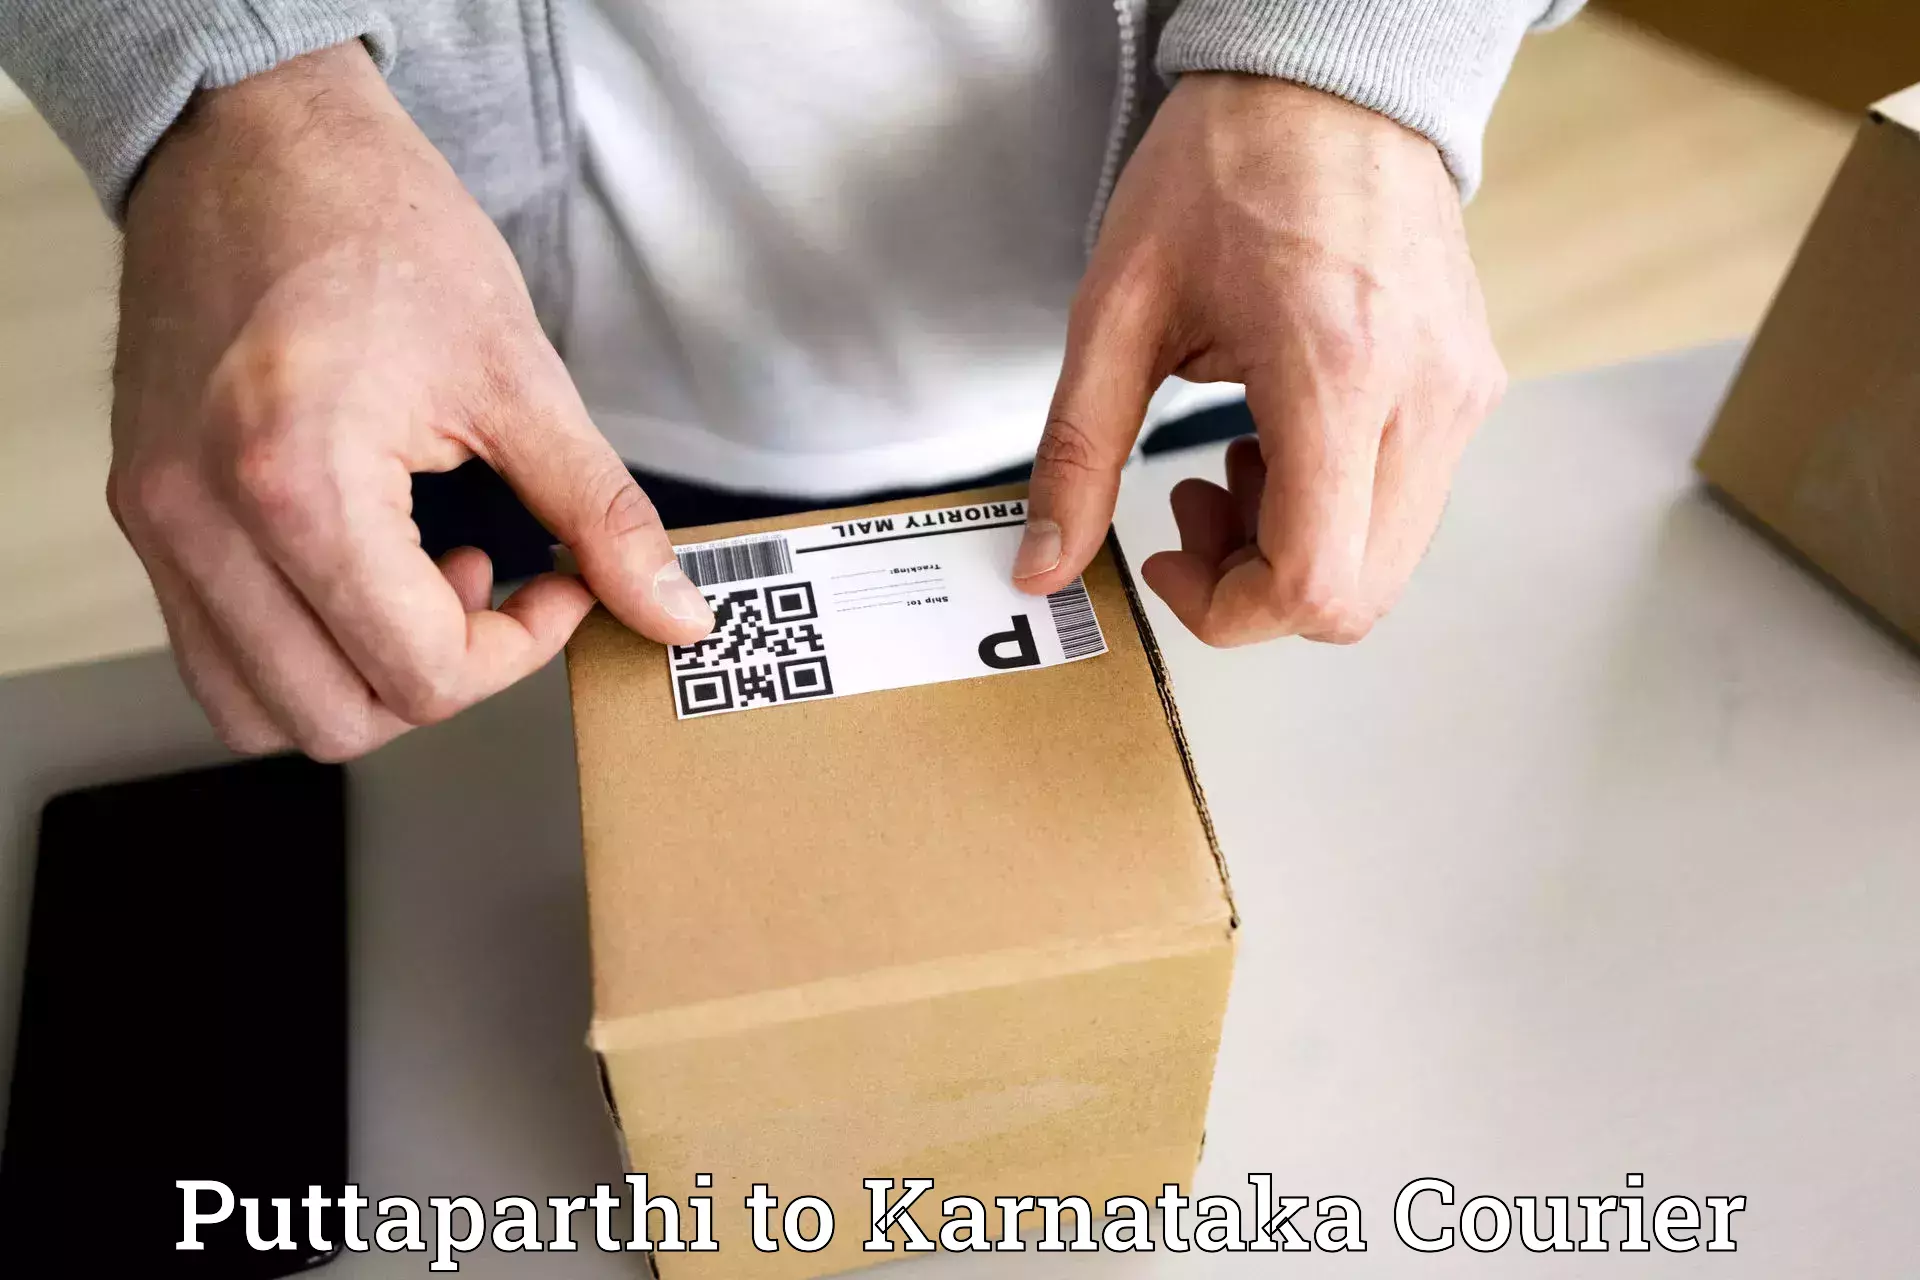 Courier service partnerships Puttaparthi to Bantwal